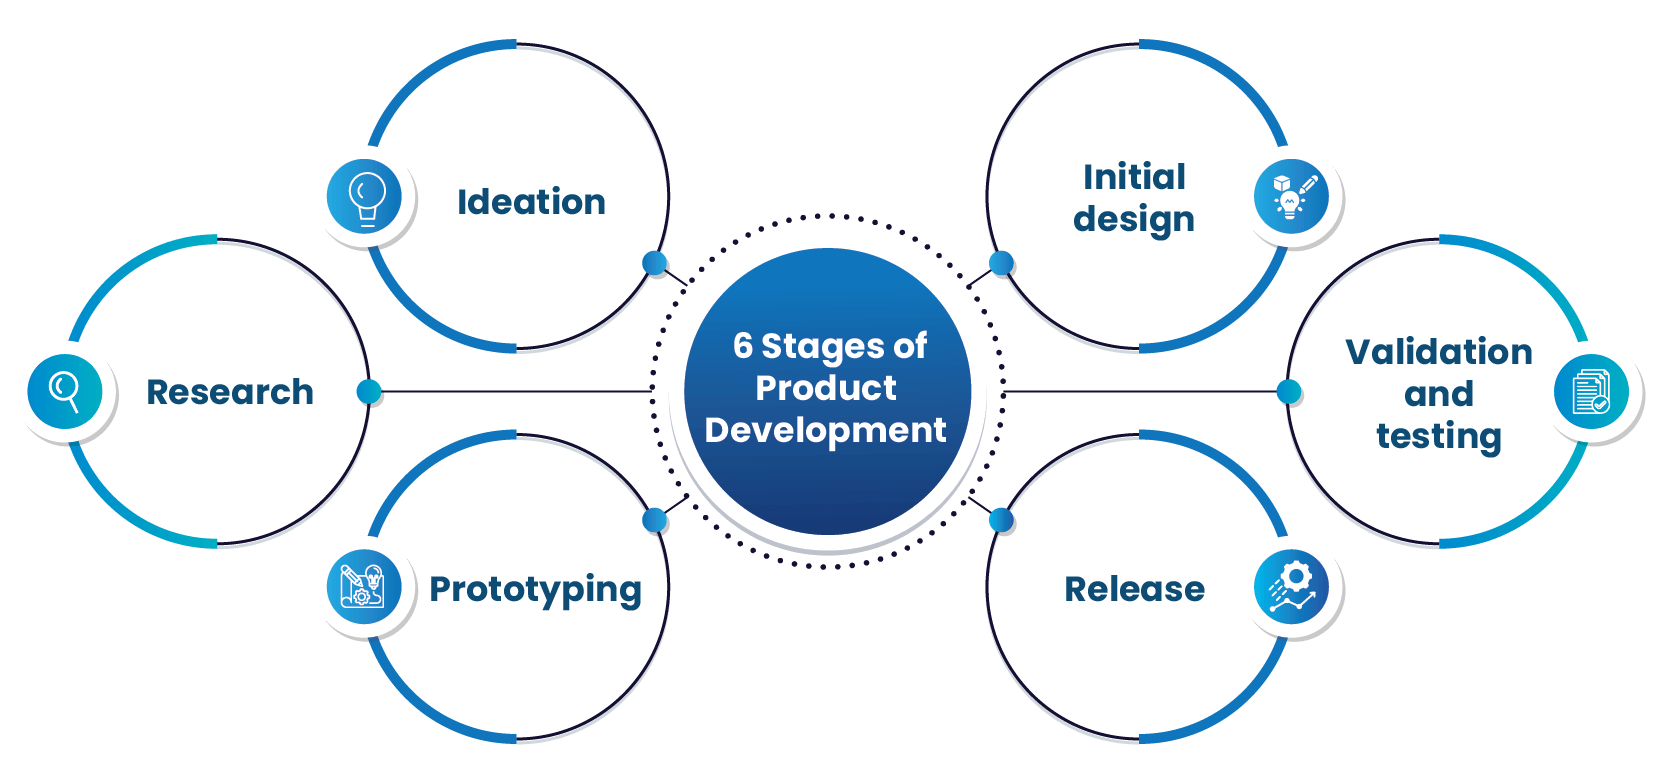 6 stages of product development